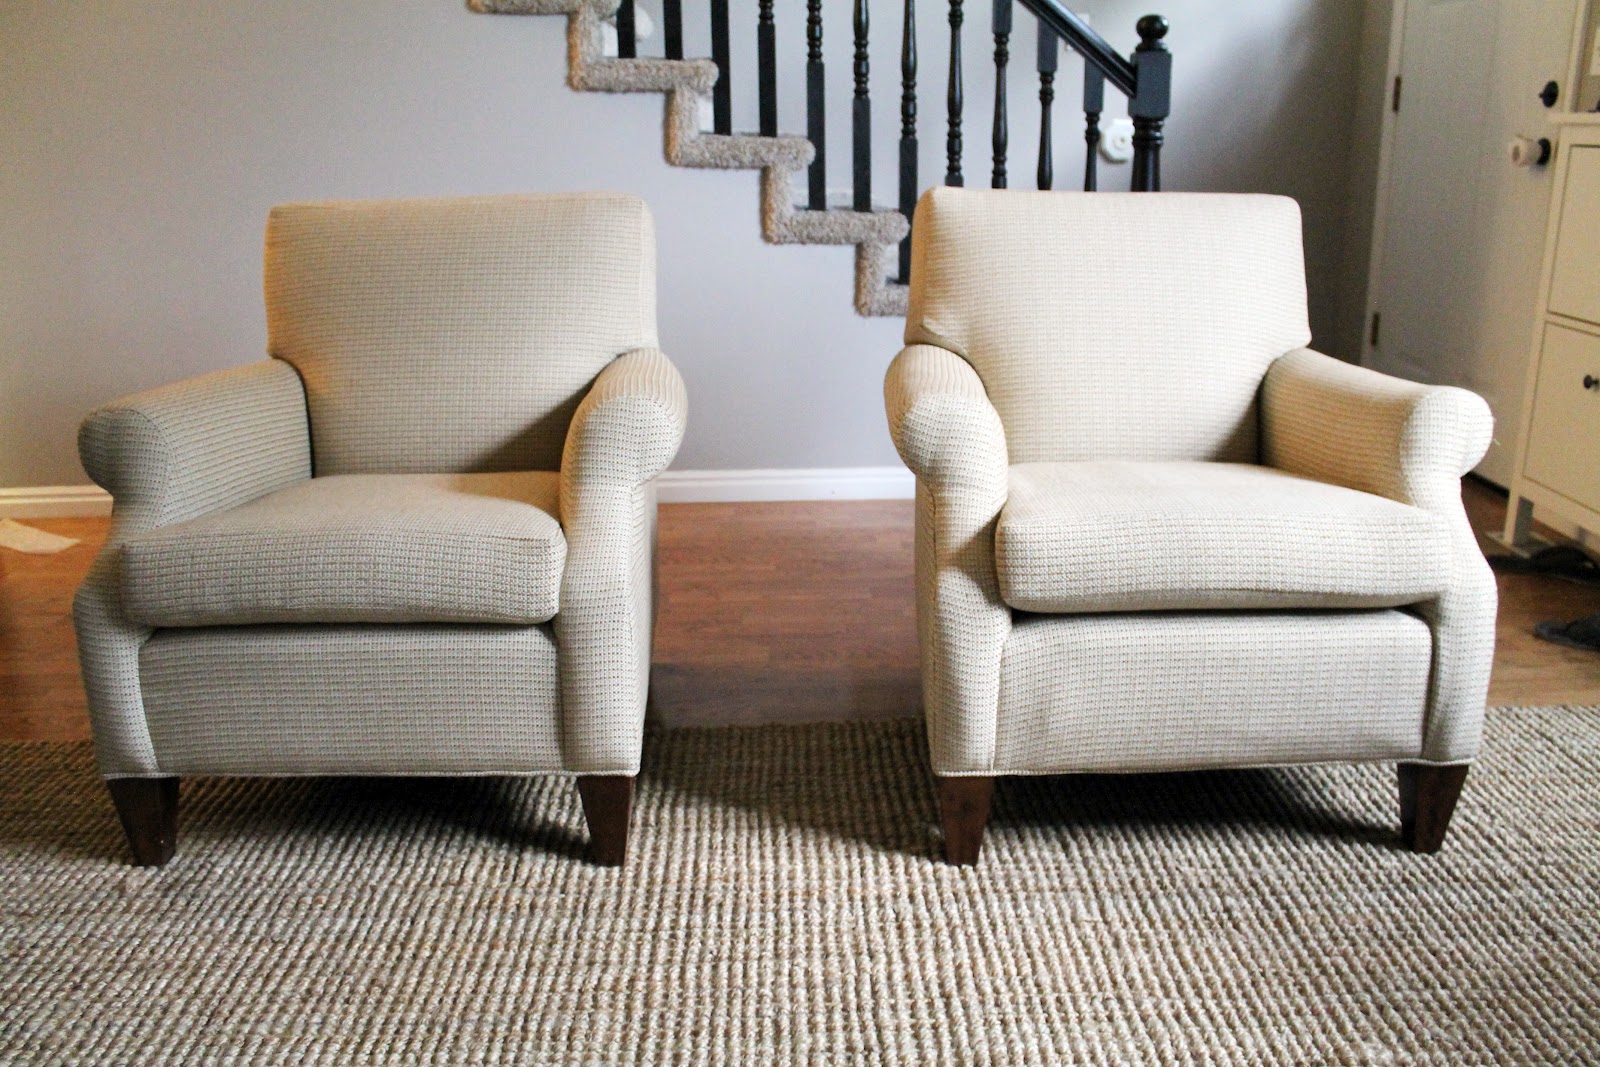 matching chairs living room